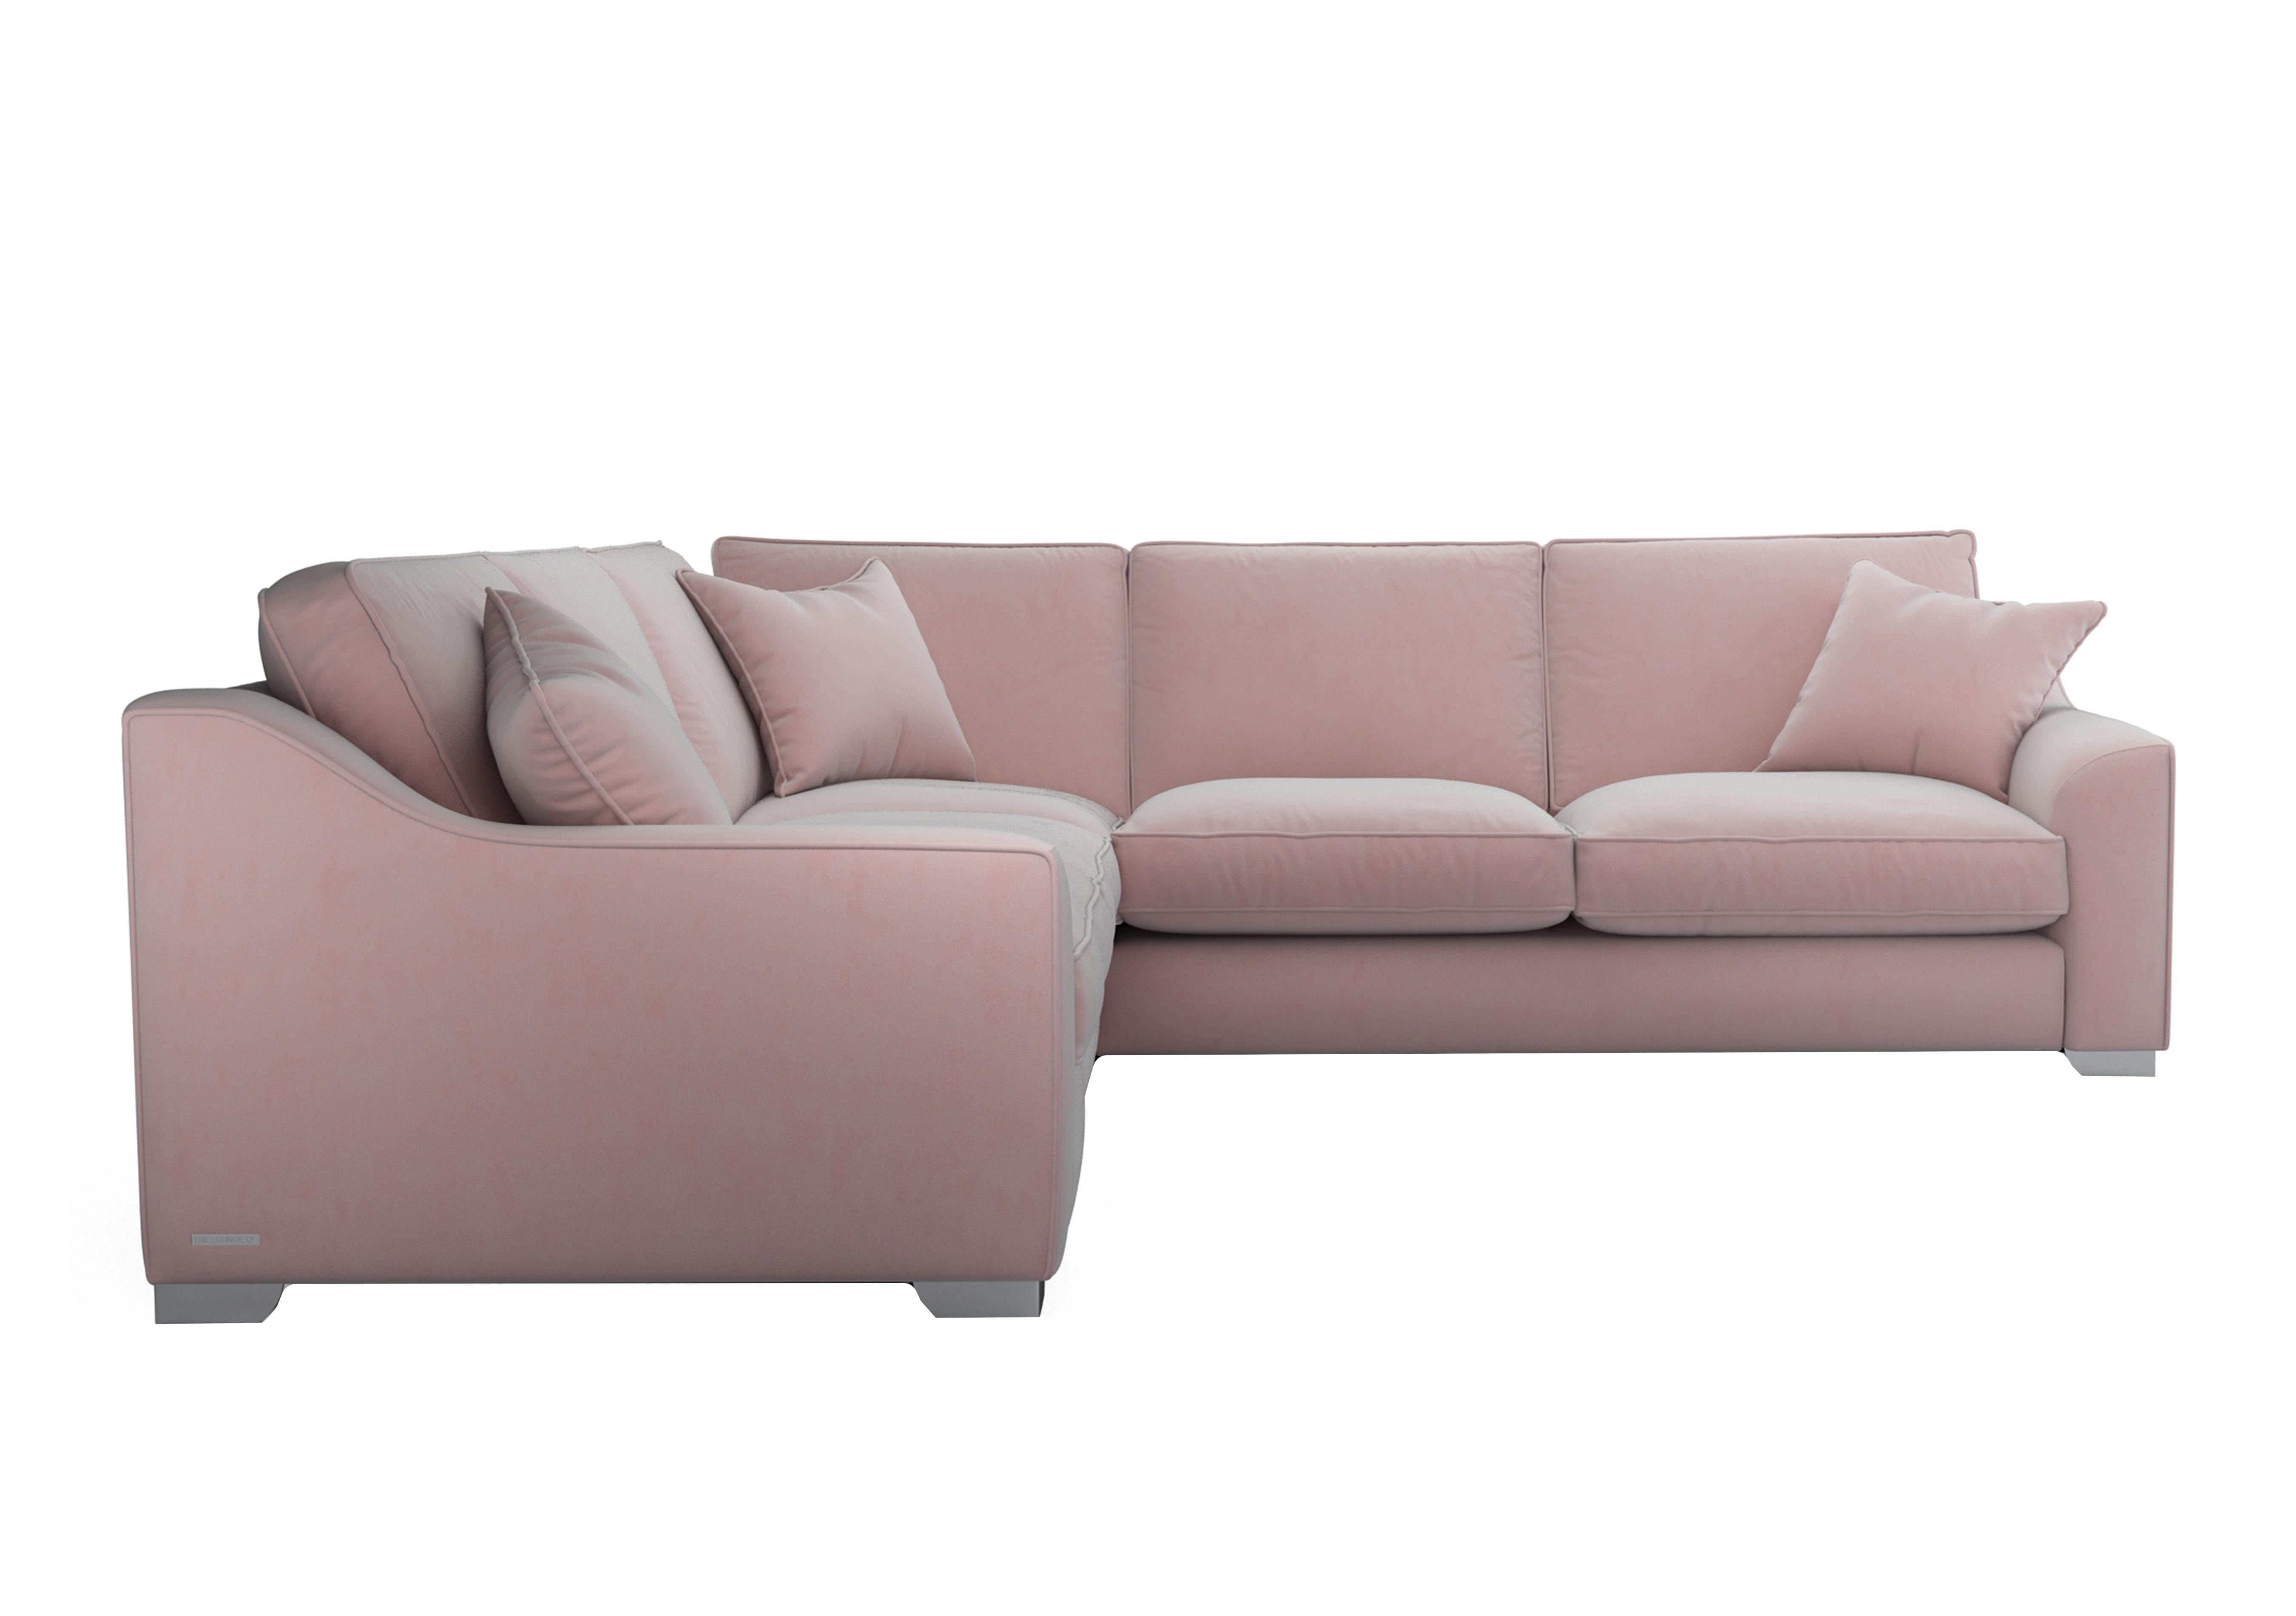 Isobel Large Fabric Corner Sofa in Cot256 Cotton Candy Ch Ft on Furniture Village